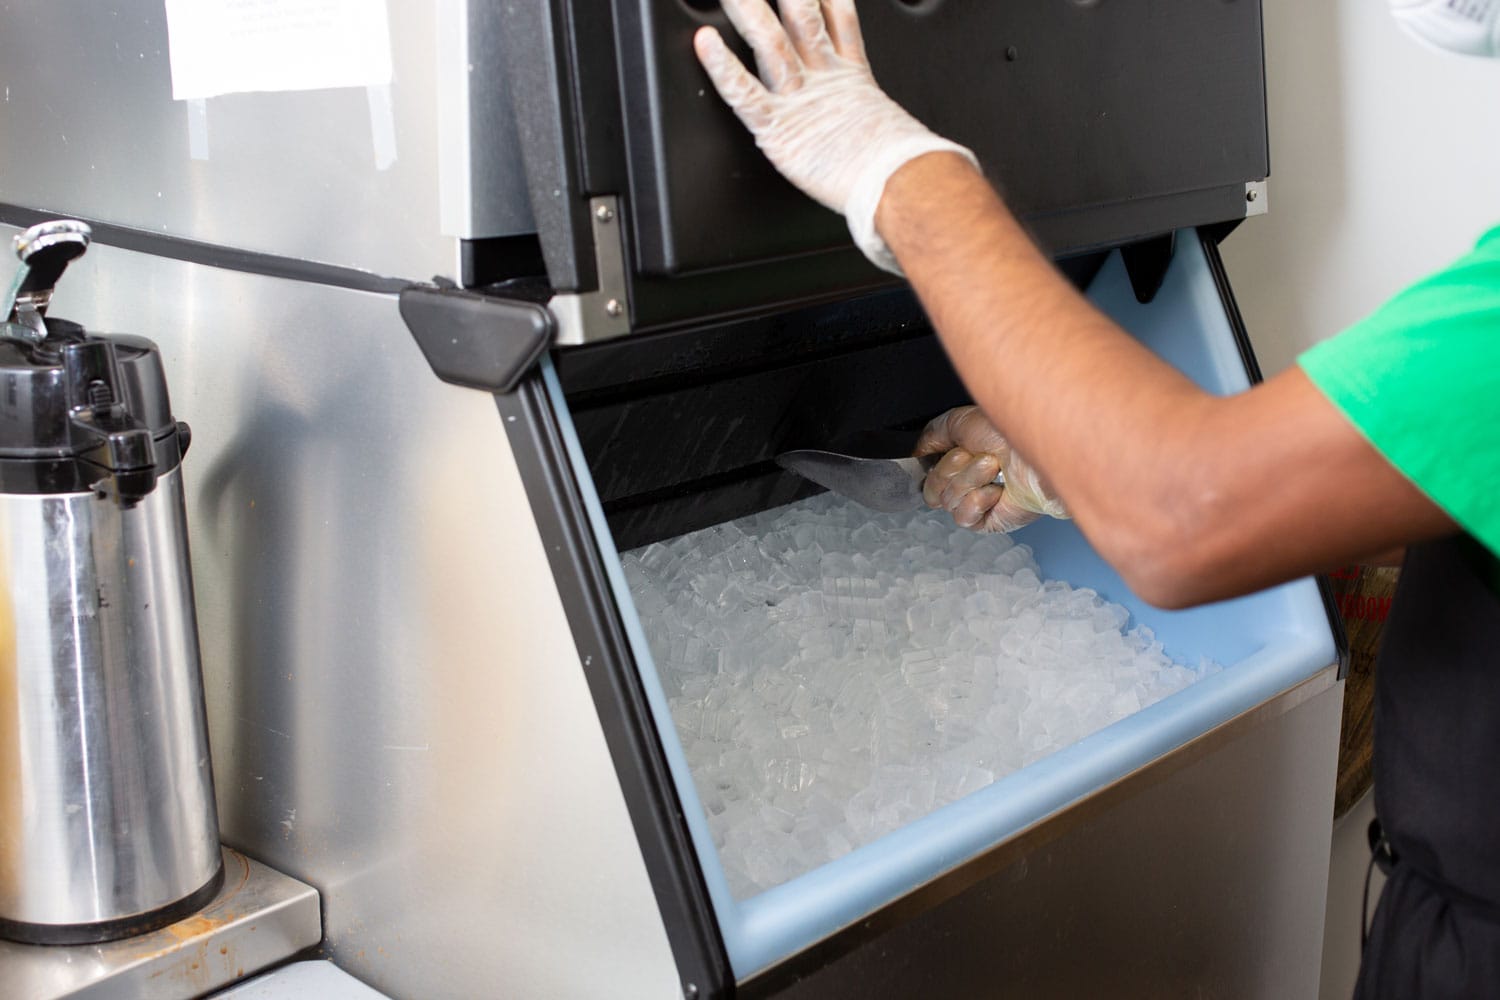 Worker taking ice from the ice maker